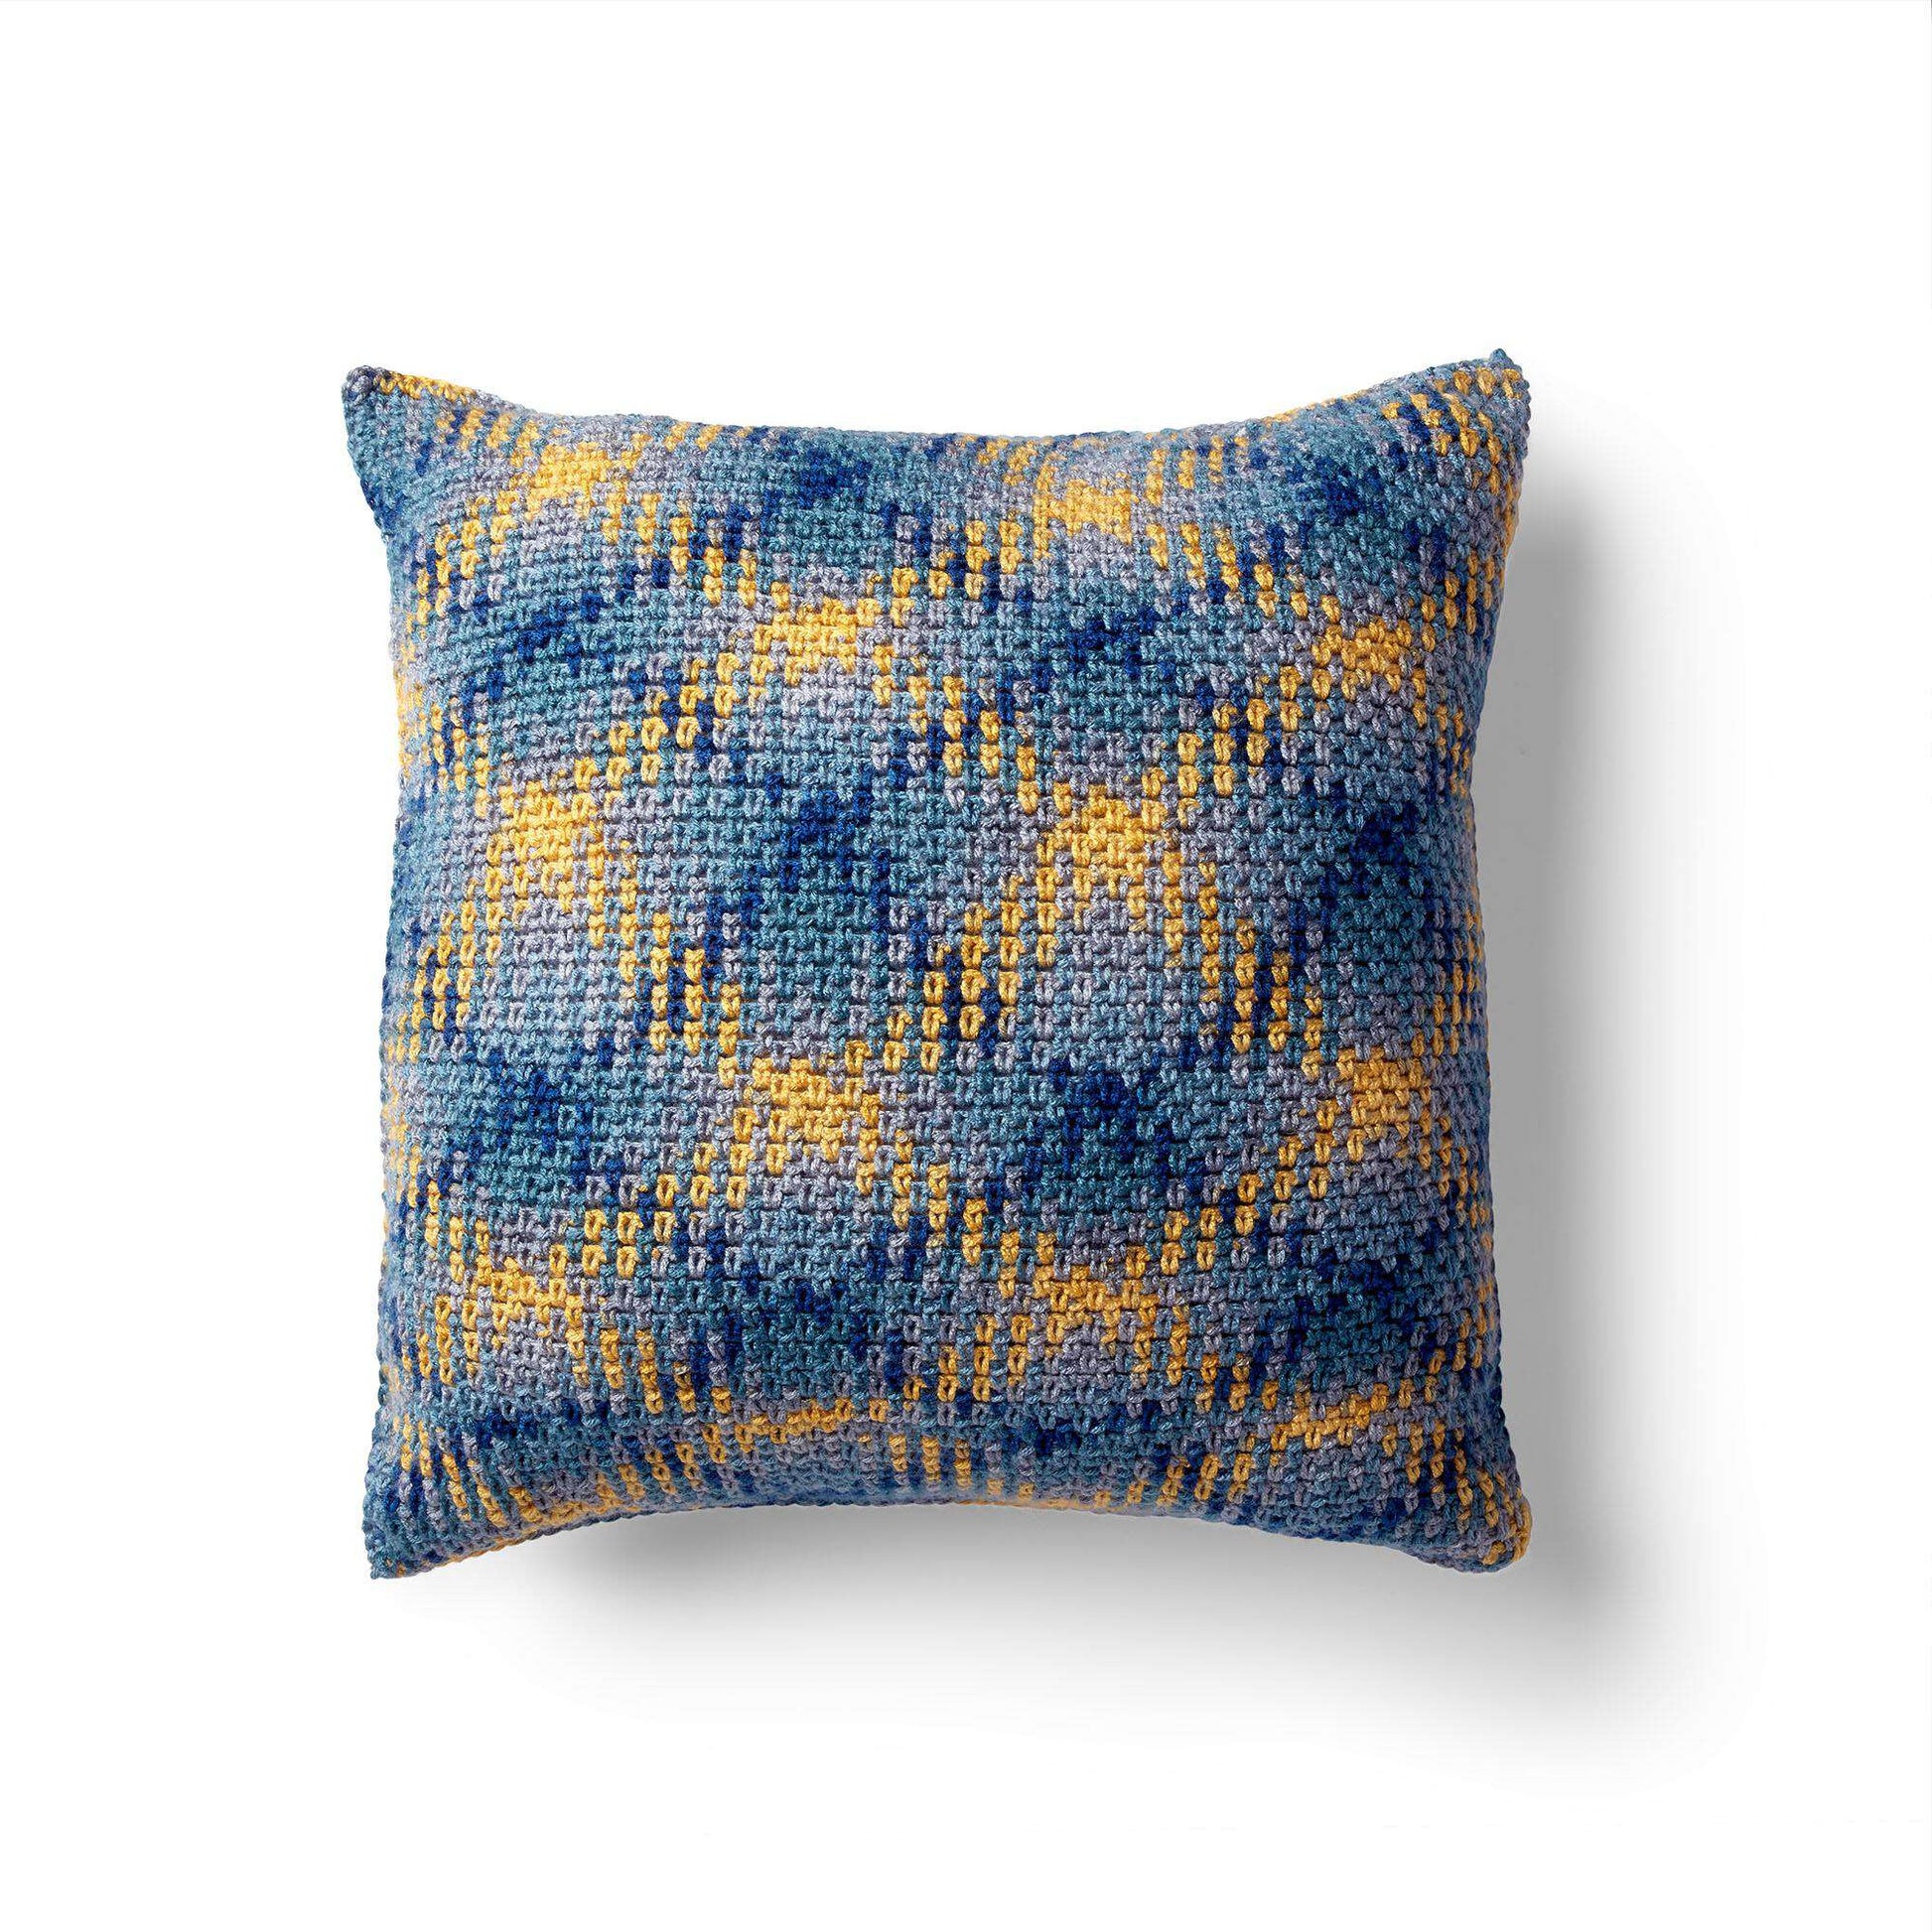 Free Caron Crochet Color Pooling Pillow Pattern